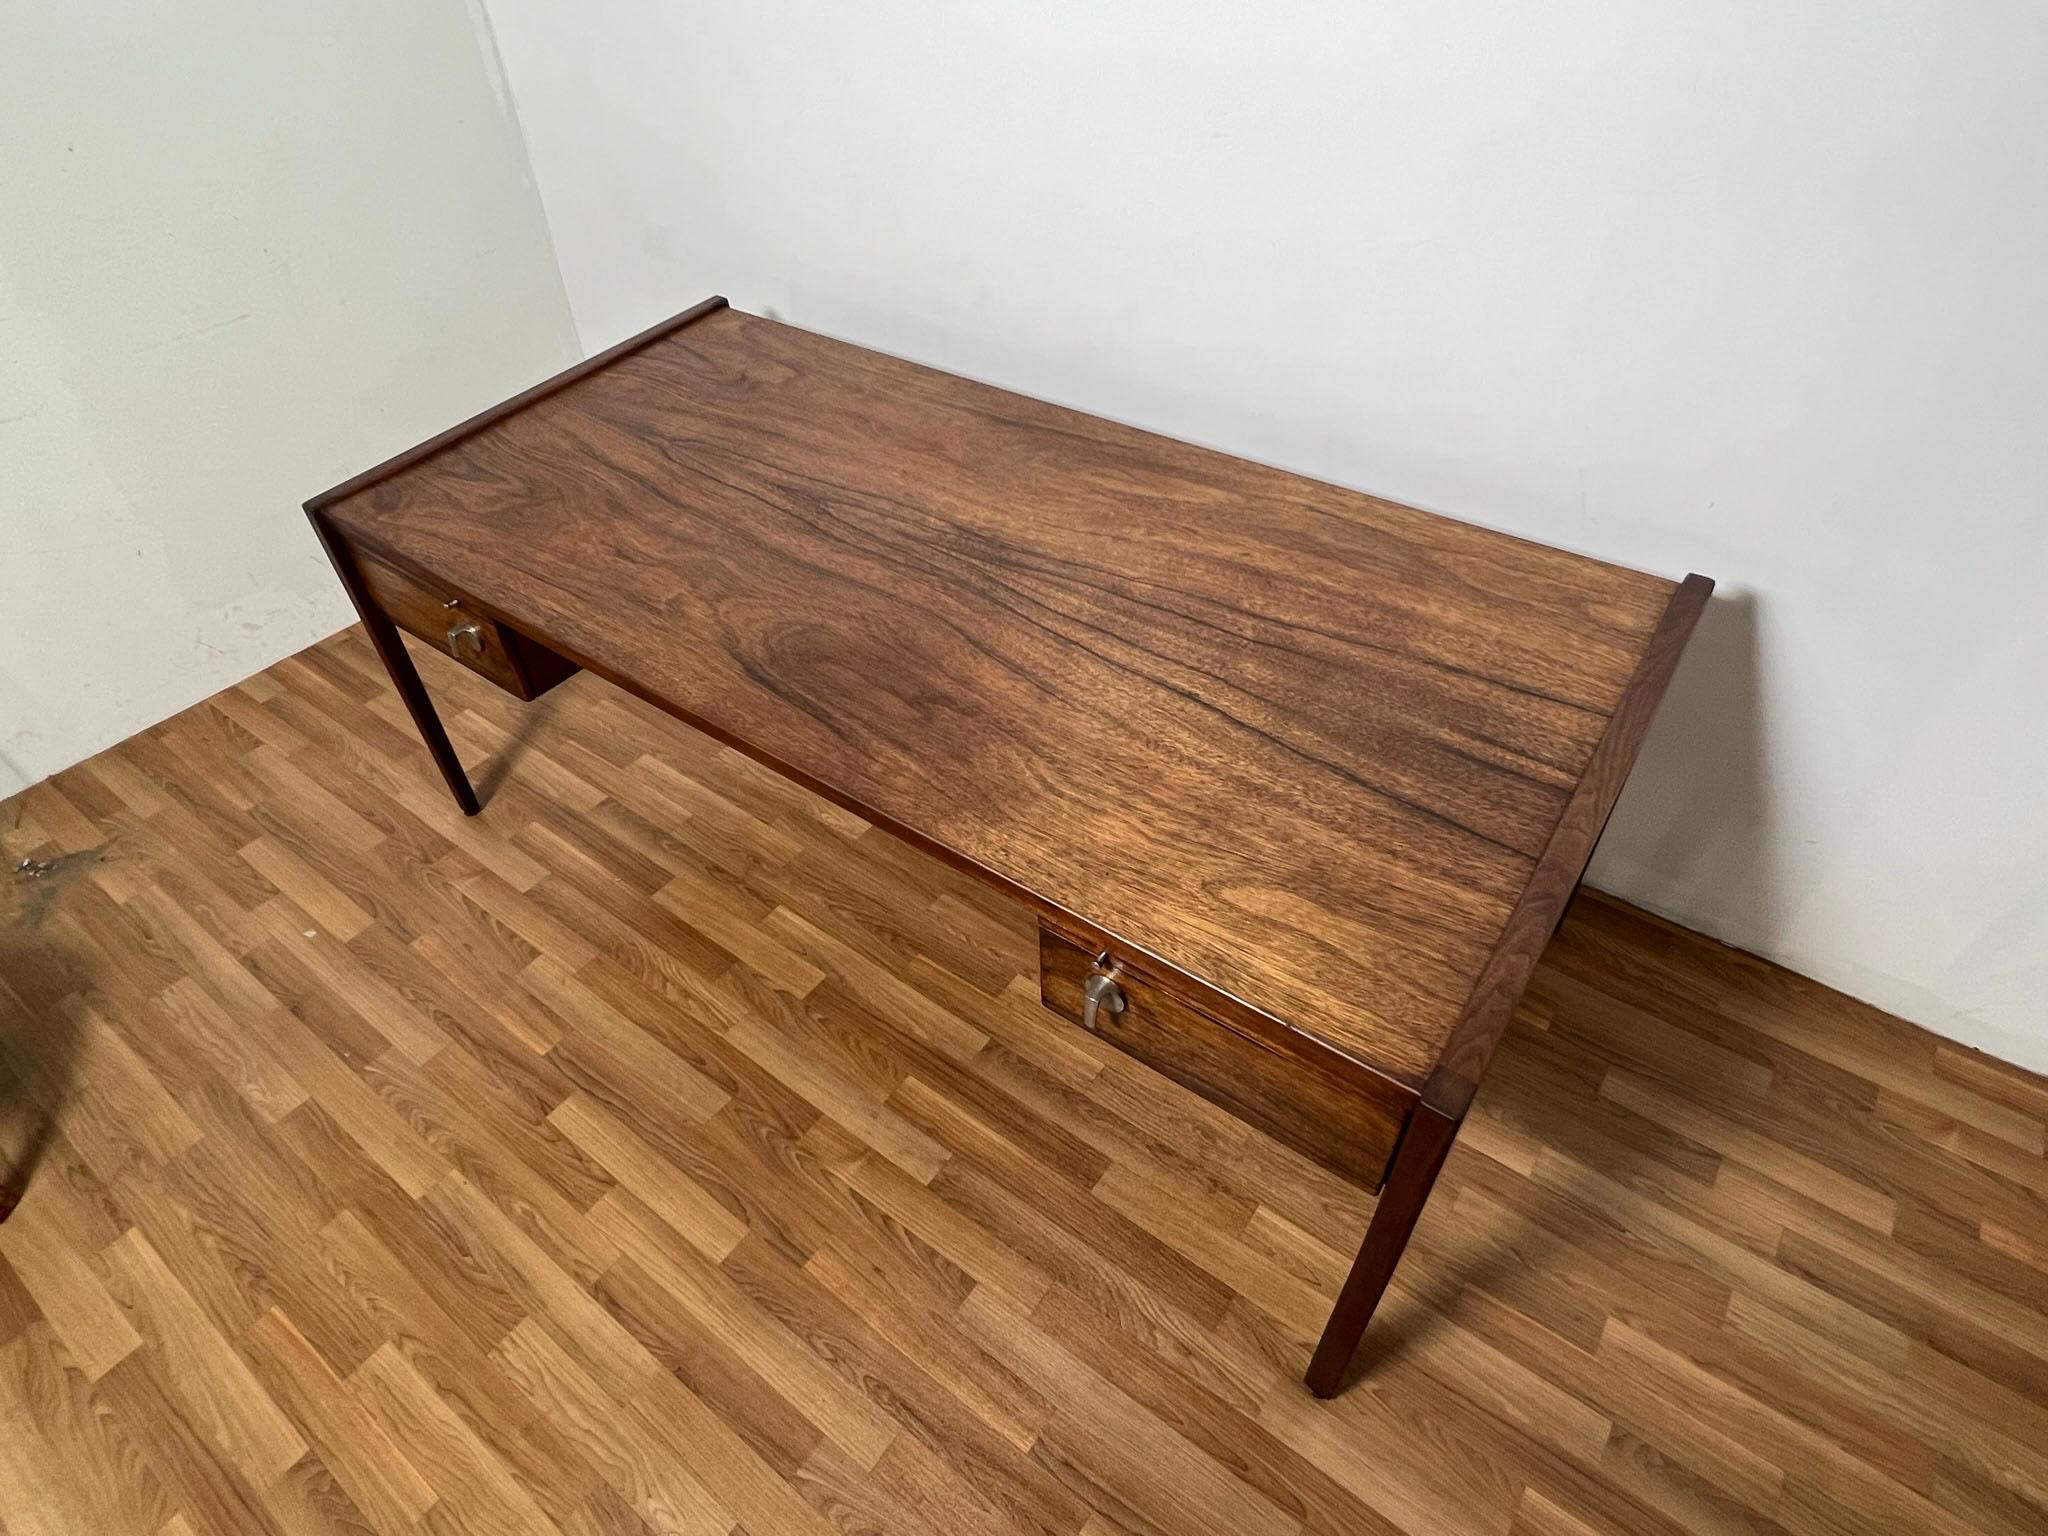 An executive desk in highly figured walnut -- resembling rosewood-- with two shallow flanking drawers, and two draw-out writing returns by Jens Risom, ca. 1960s. Desk top height slightly tapers from back to front (like a subtle drafting desk),